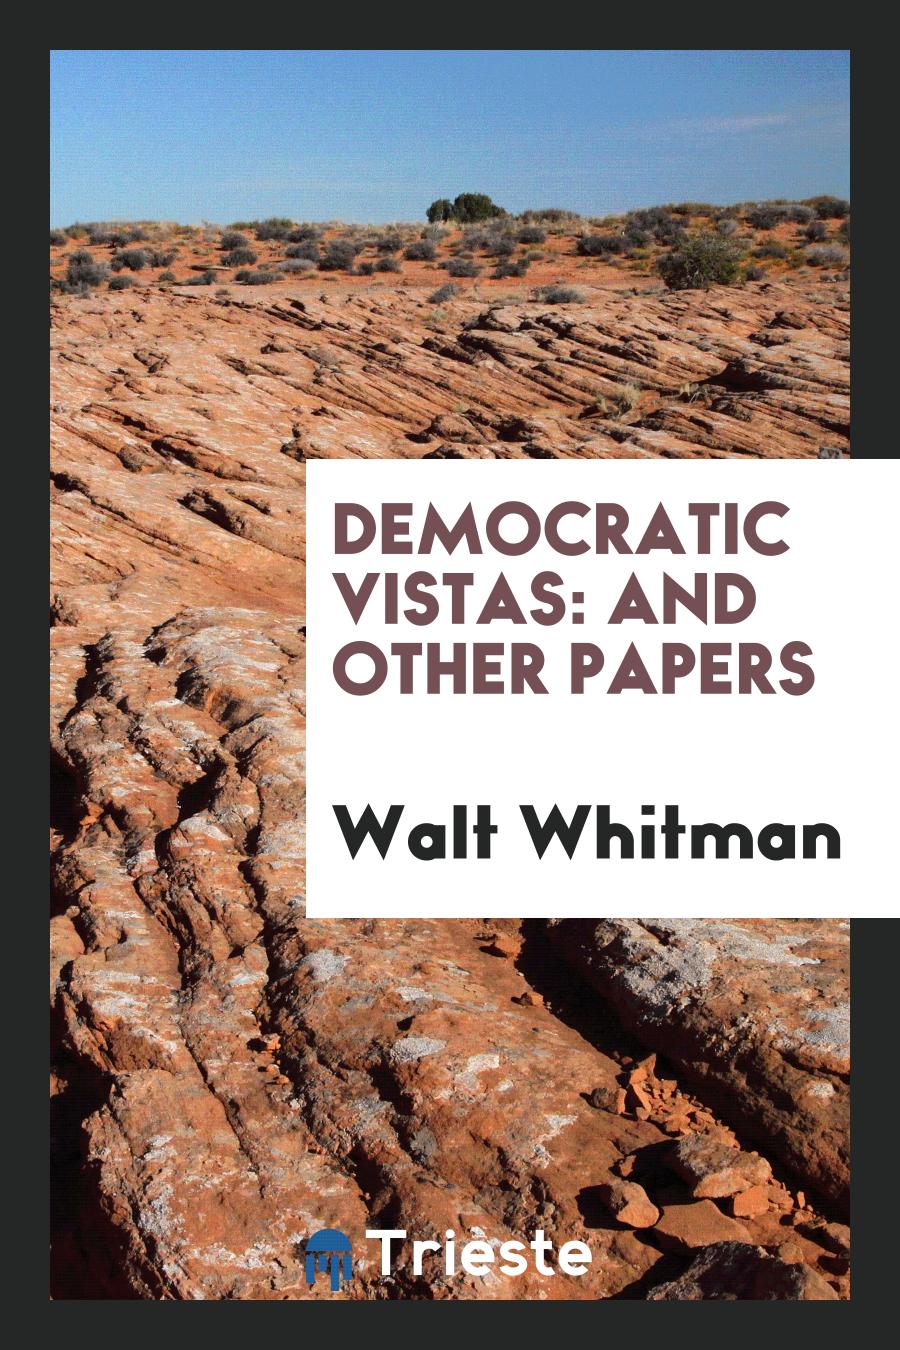 Democratic Vistas: And Other Papers